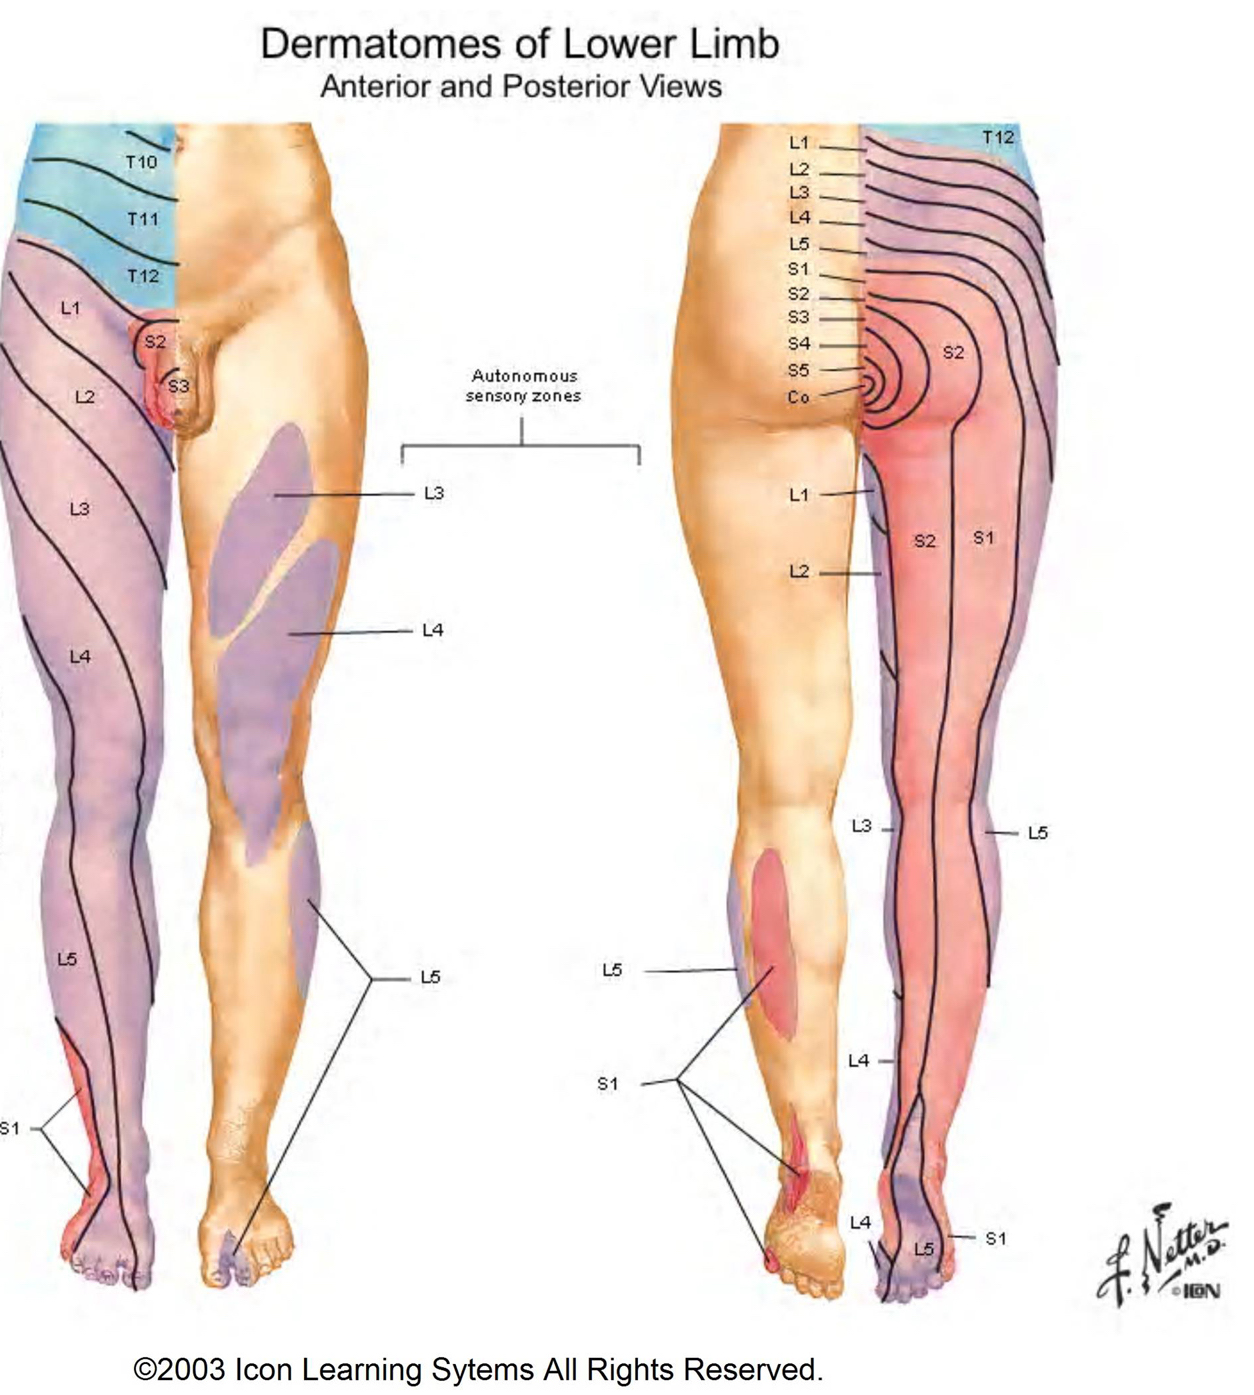 Starting at L1, we can appreciate that the spinal nerves progress down the front of the leg, and then back up the back of the leg to the saddle region (source).